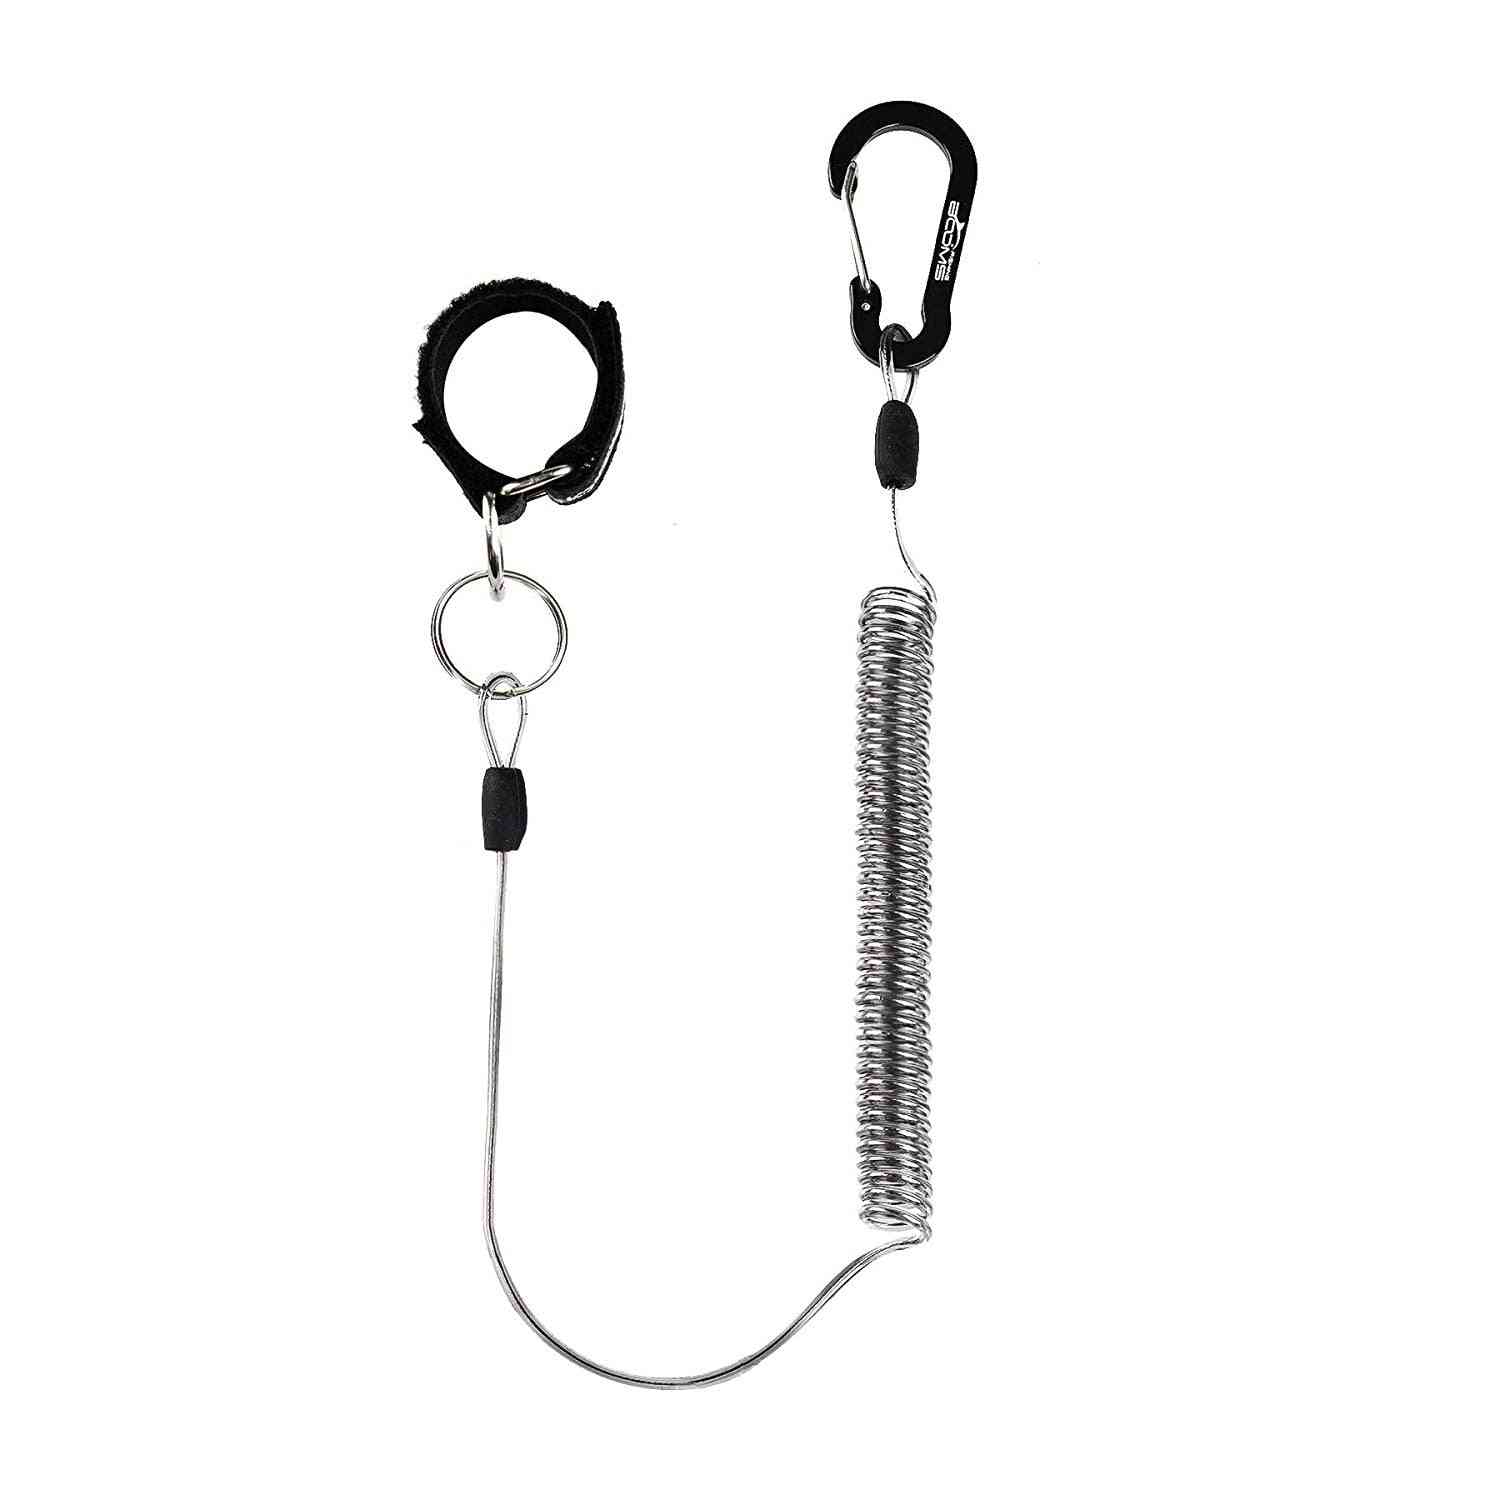 Booms Fishing Coiled Lanyards Carabiner Clip With Rod Straps For Fishing